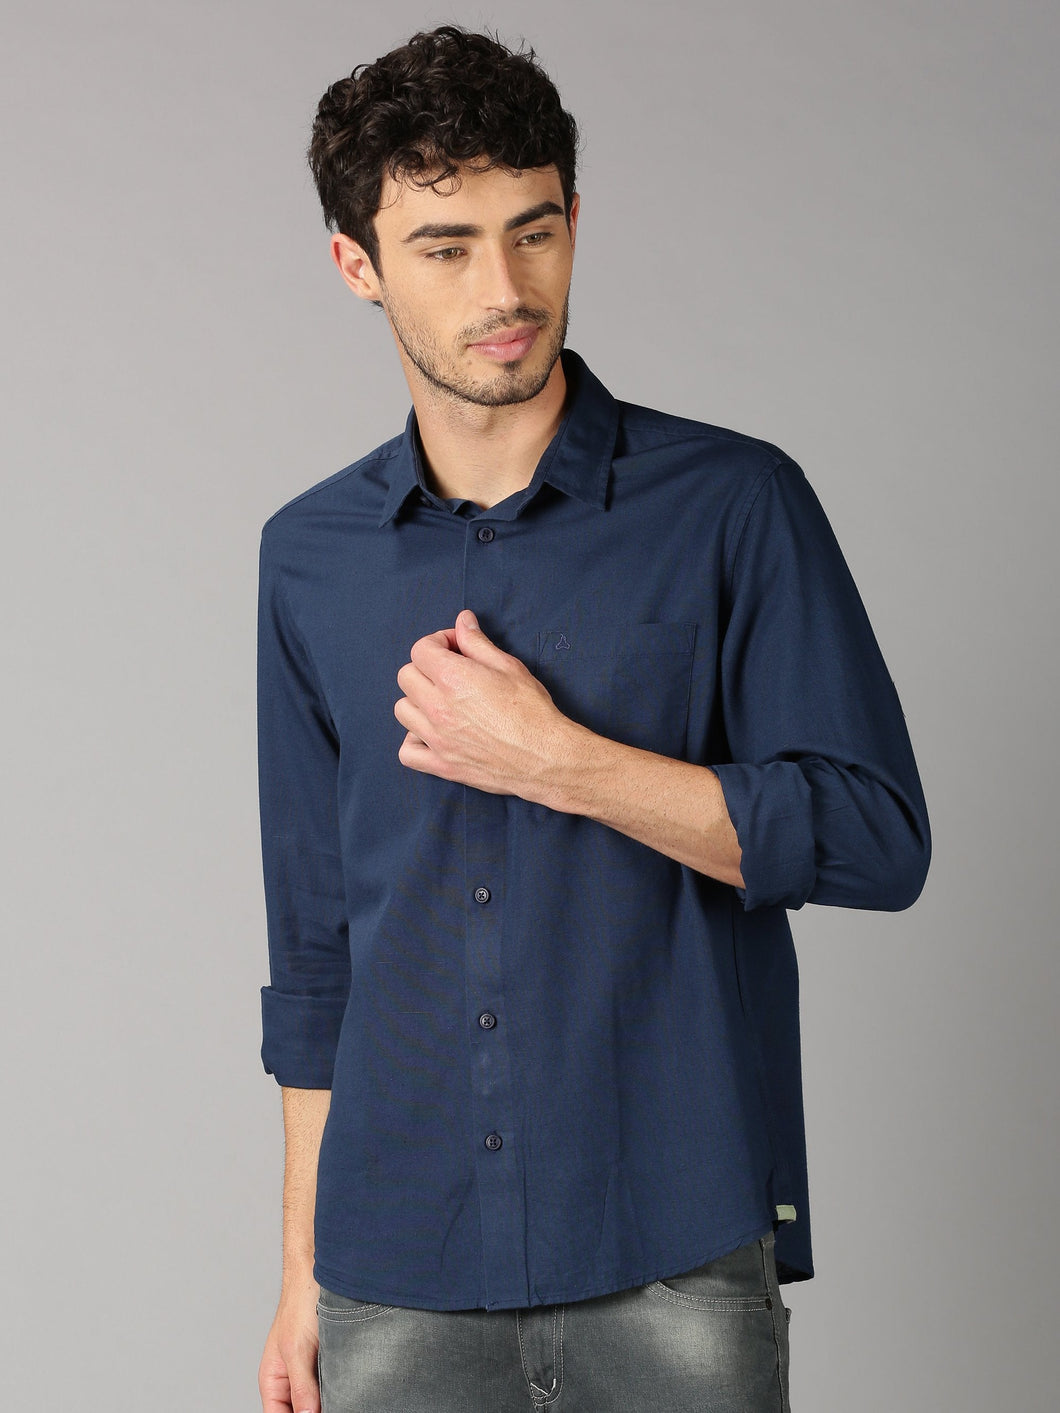 Polycotton Navy Blue color Full Sleeve Formal shirt